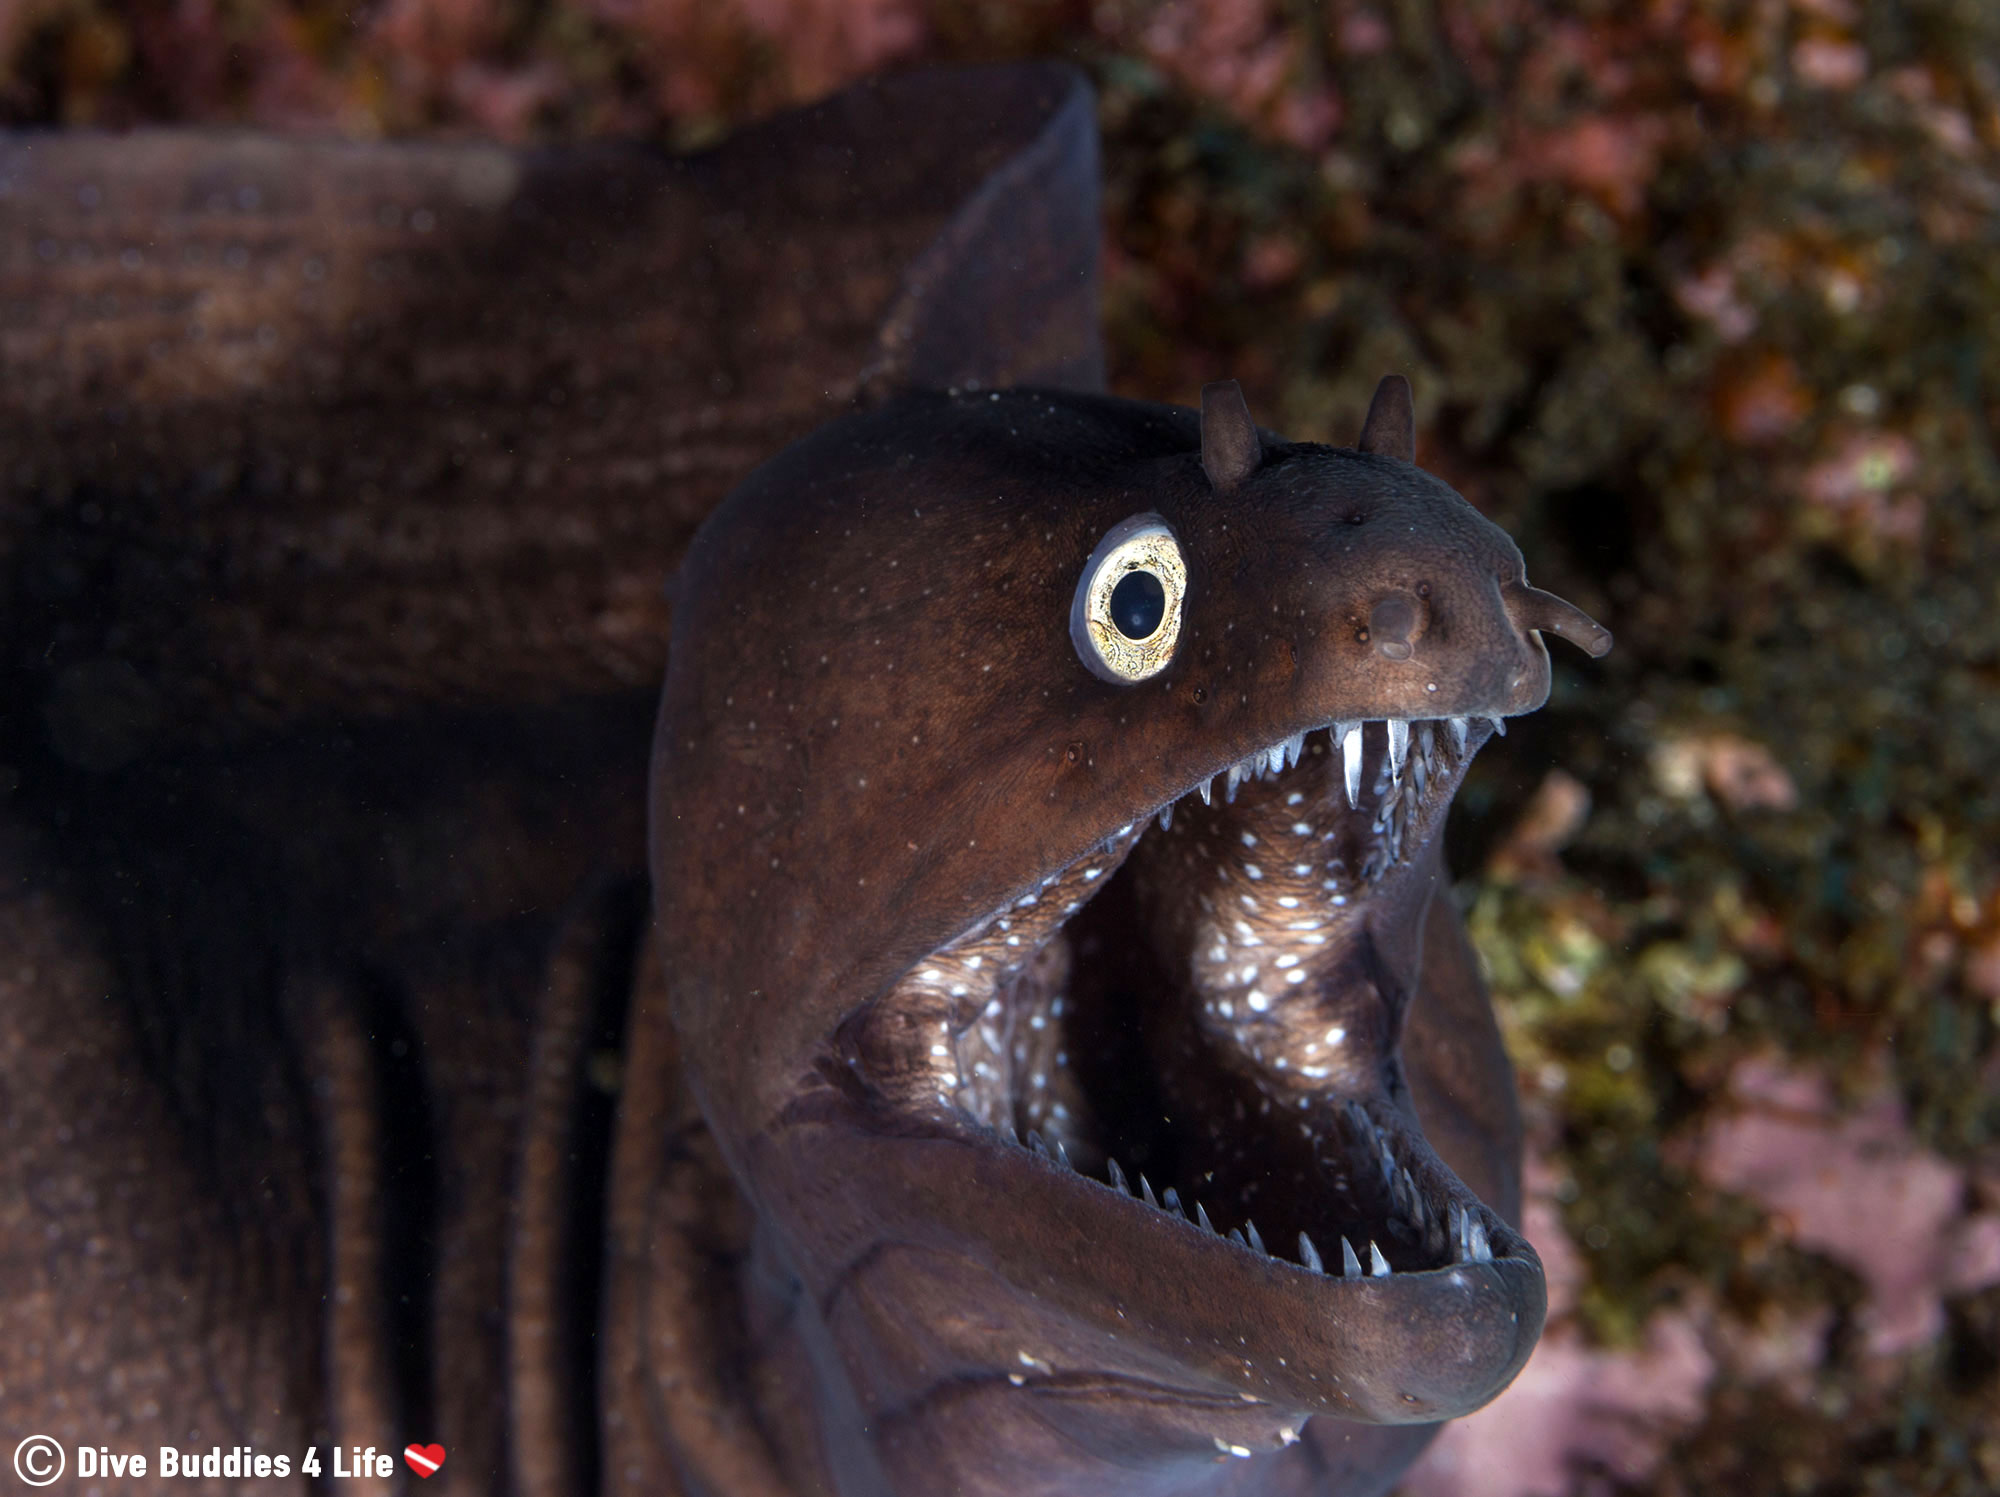 A Purple Moray Eel Showing His Teeth To A Dive In The Azores Islands Of Portugal, Europe